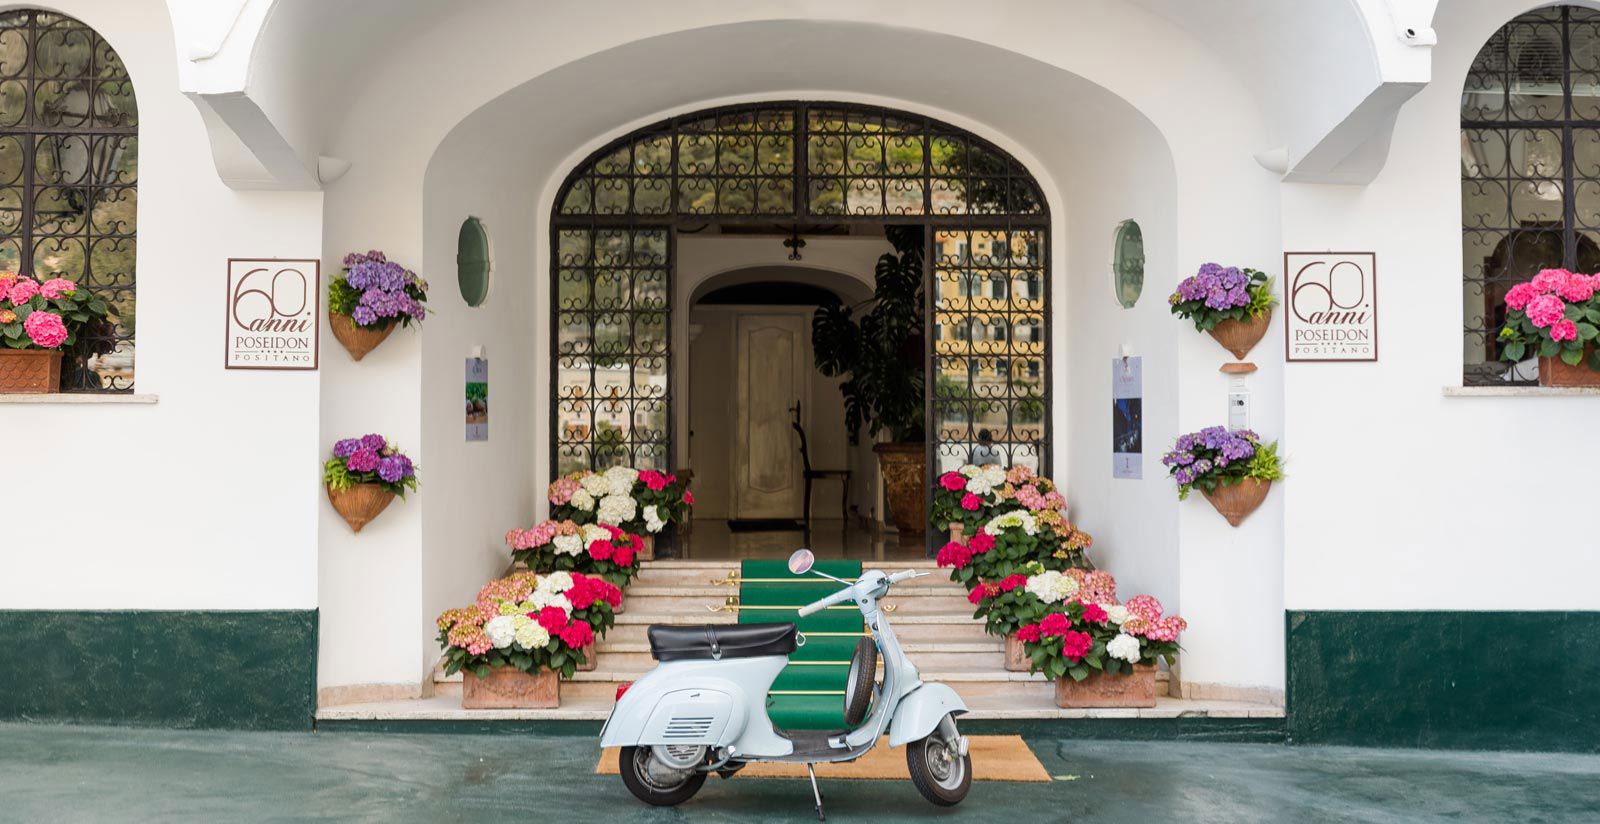 Your private parking in Positano 2